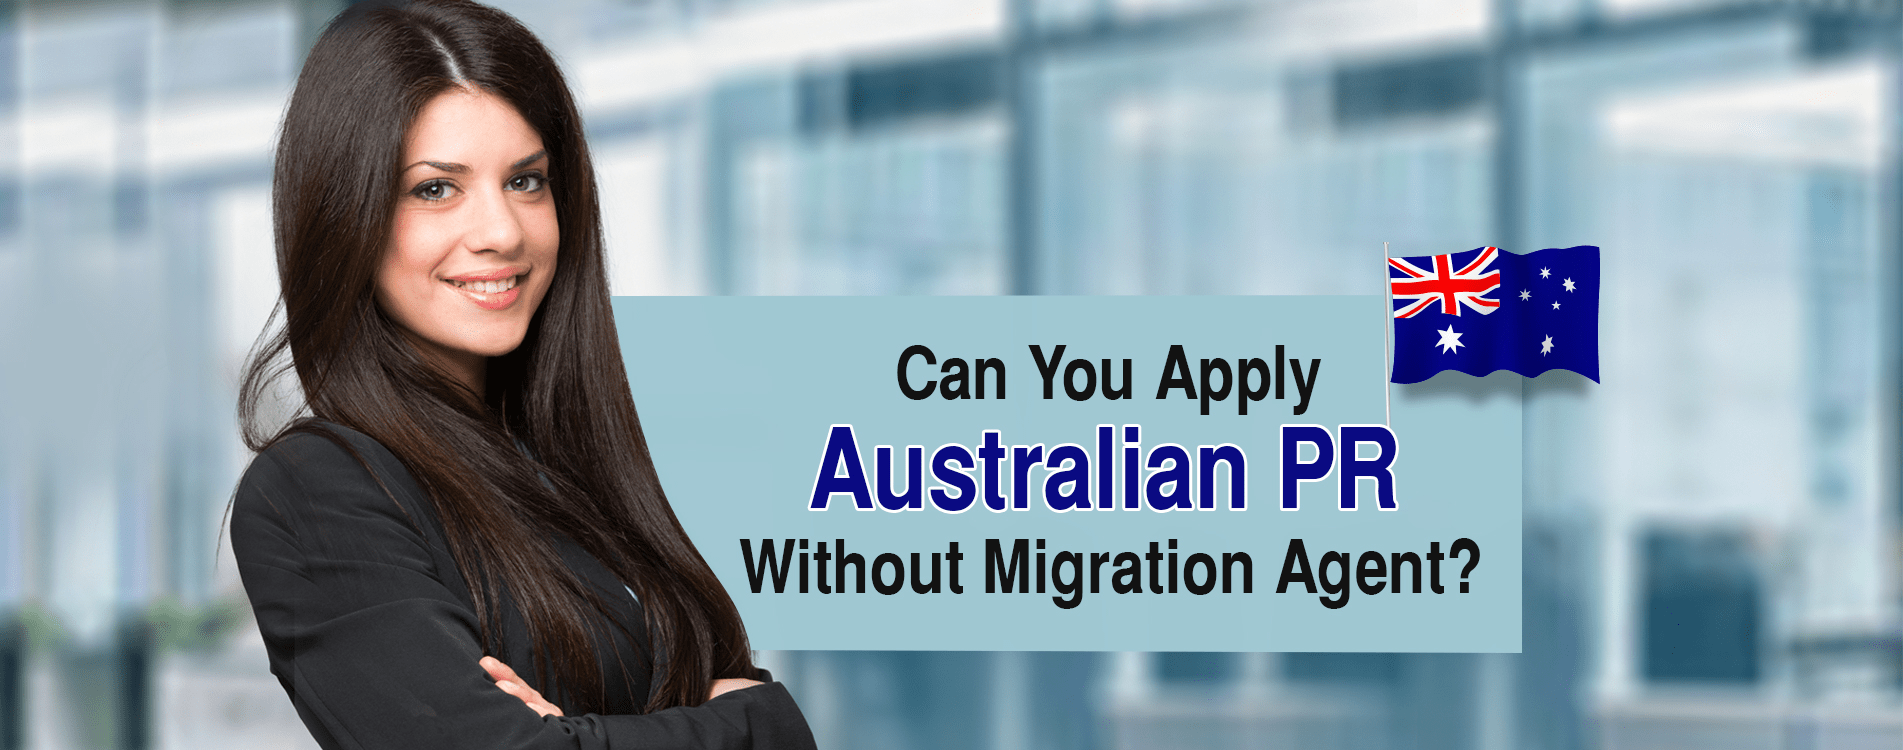 Can You Apply Australian PR Without a Migration Agent?